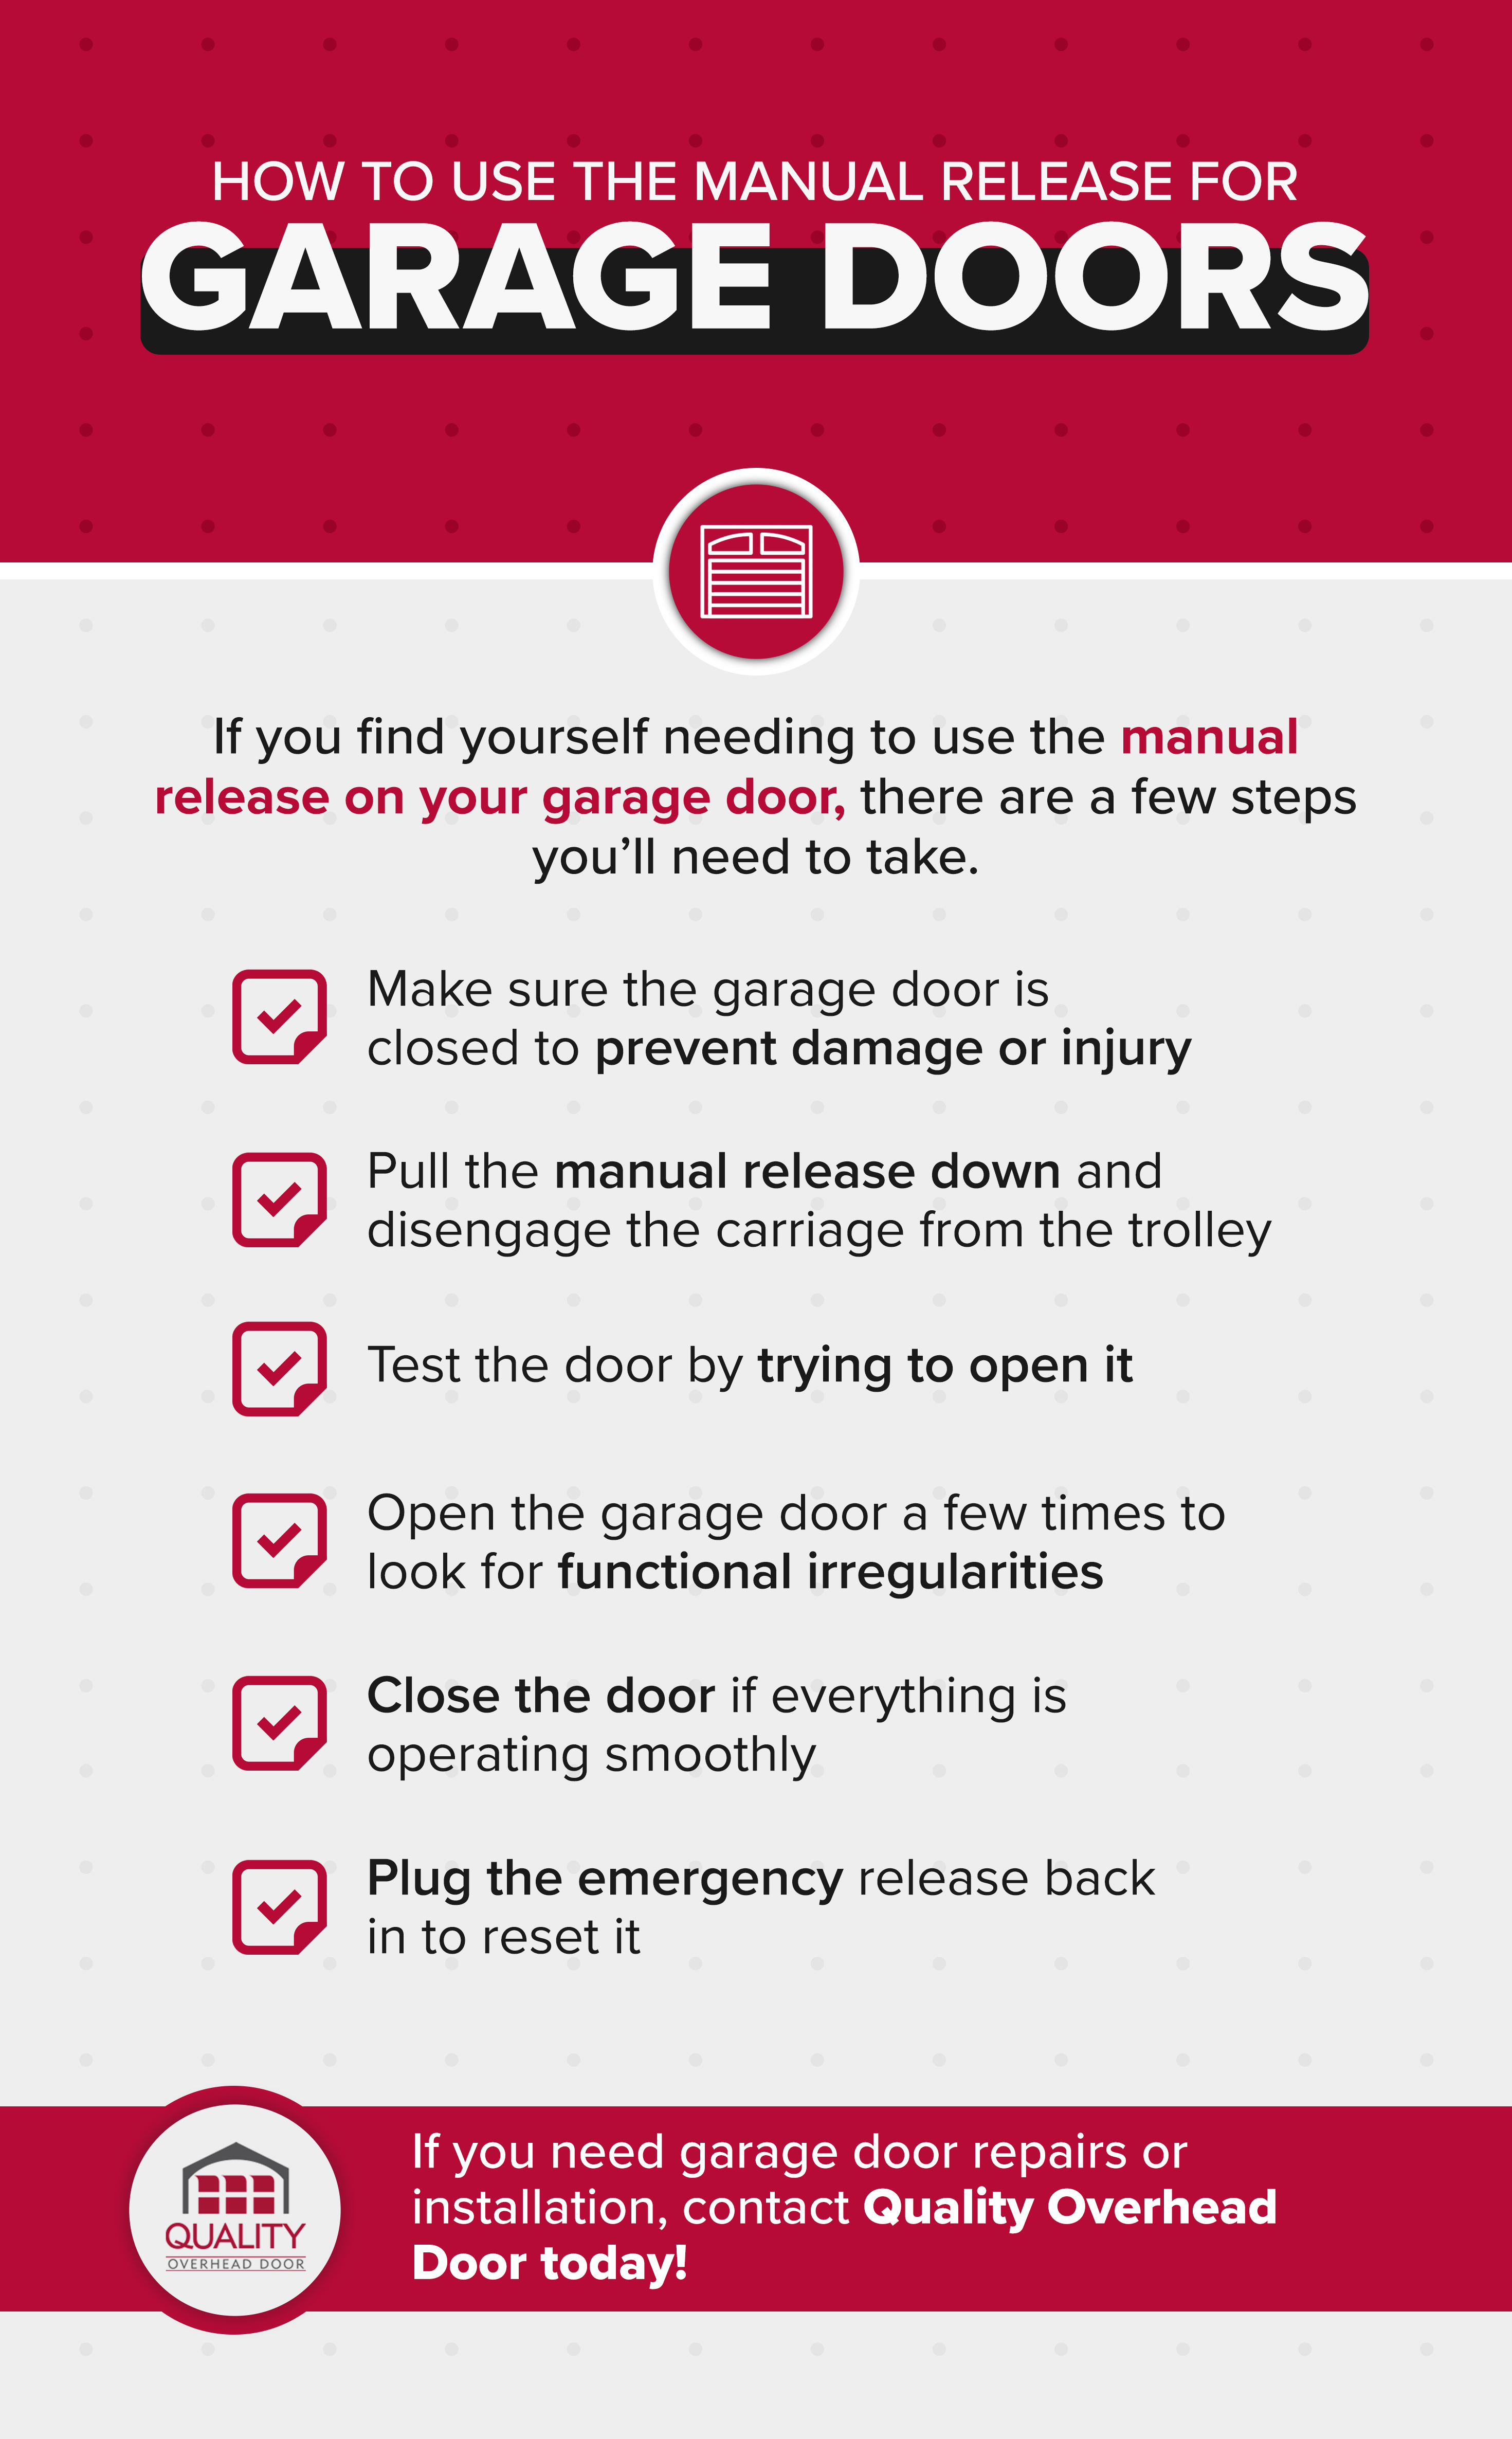 How to use the manual release for garage doors